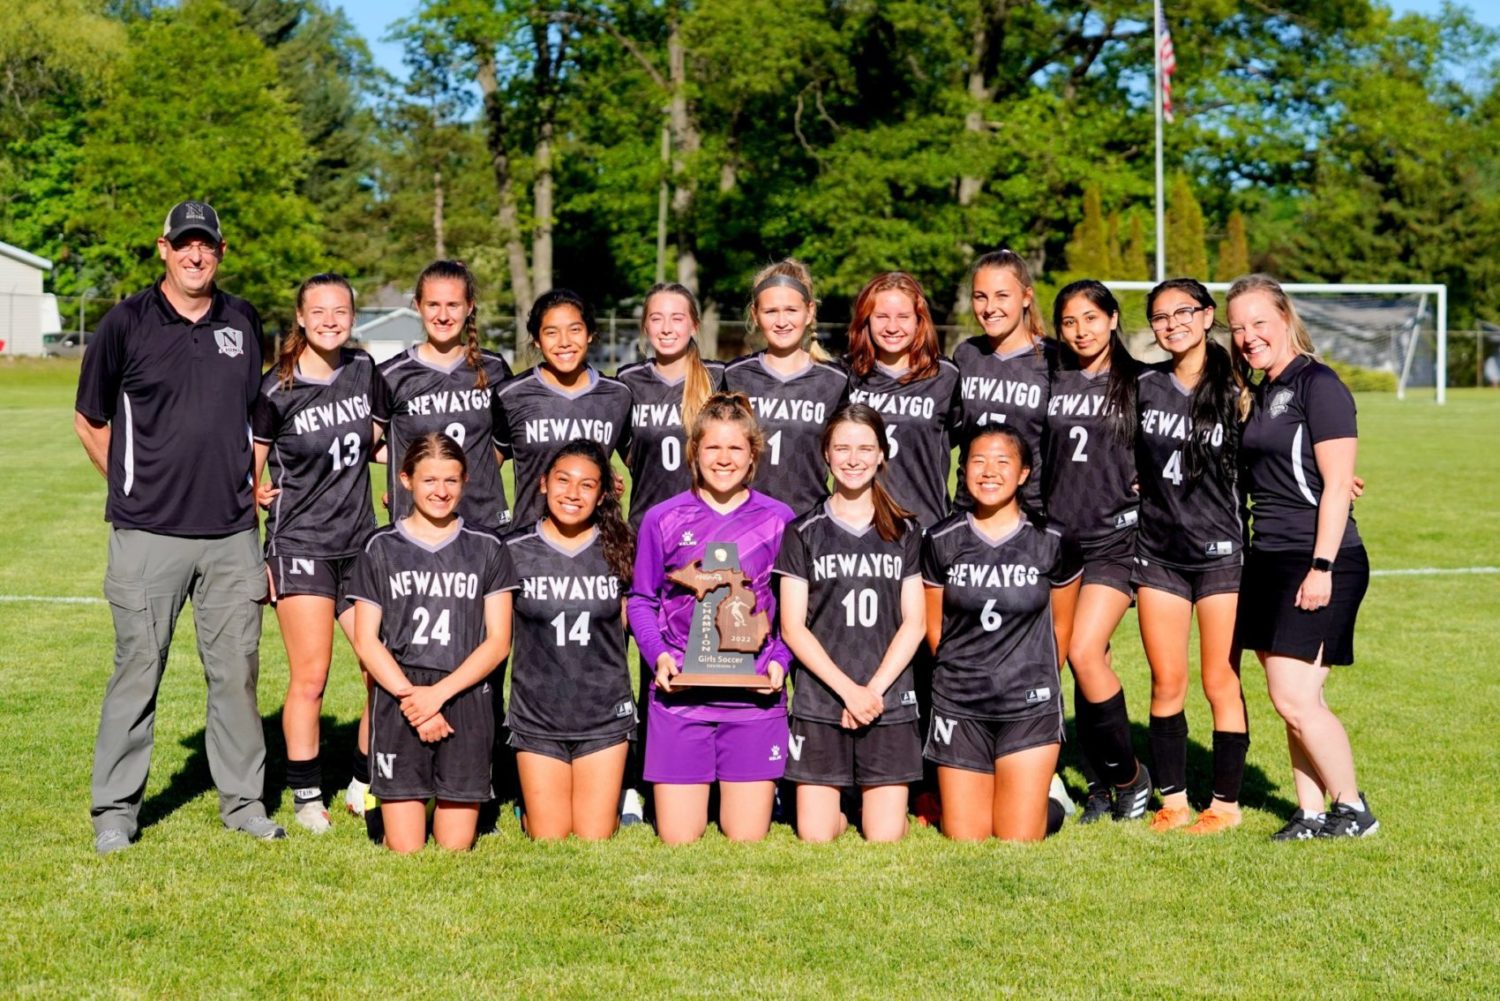 Newaygo wins first-ever girls soccer district championship with 1-0 shutout win over Orchard View